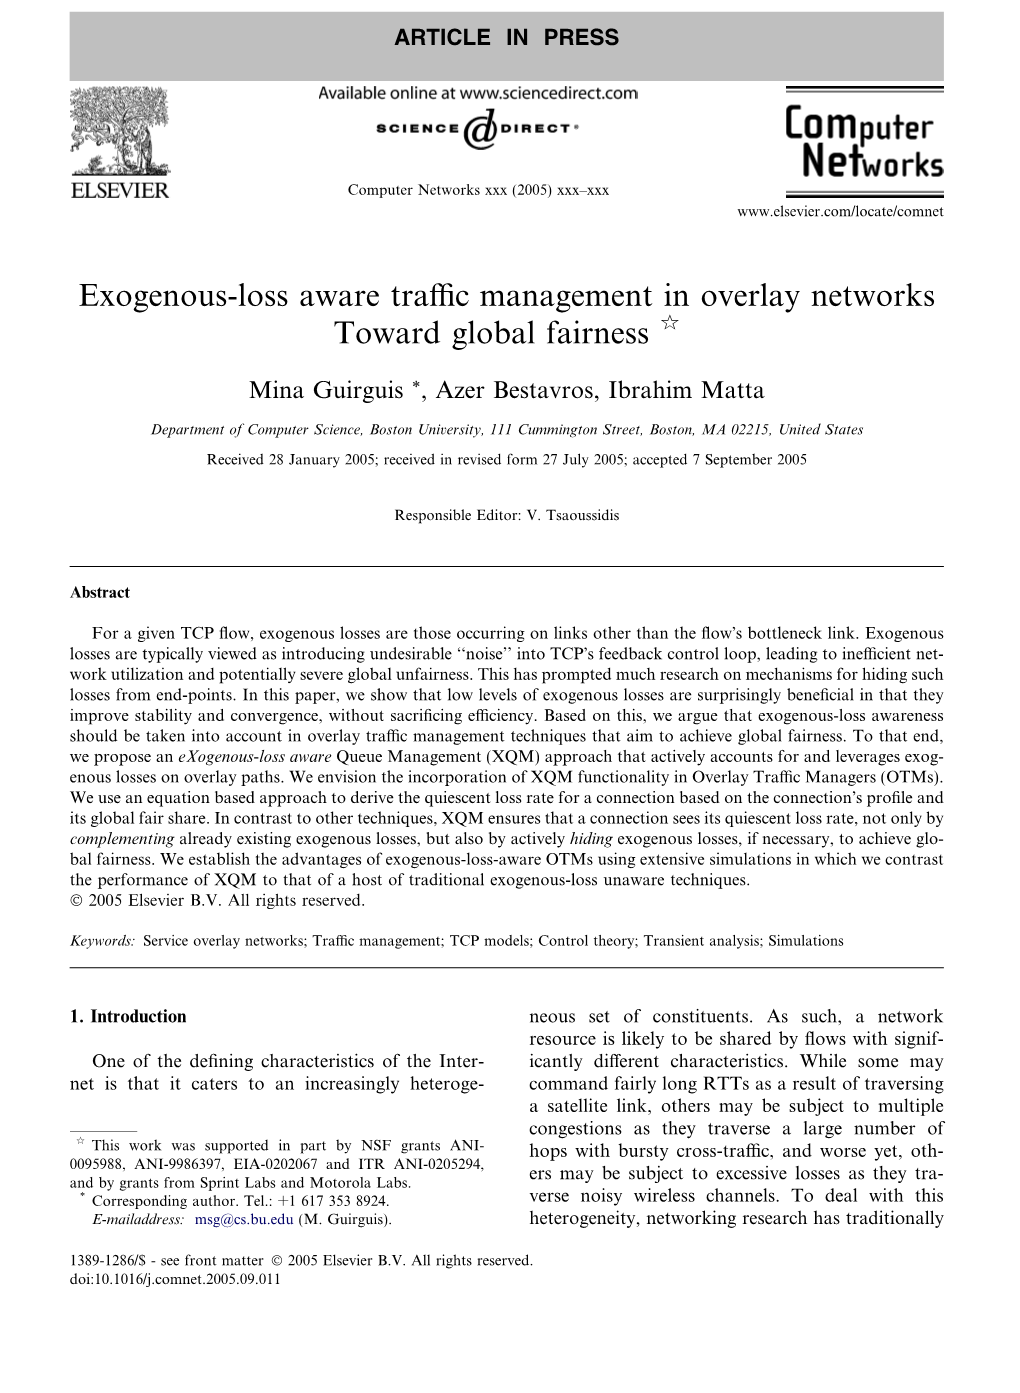 Exogenous-Loss Aware Traffic Management in Overlay Networks